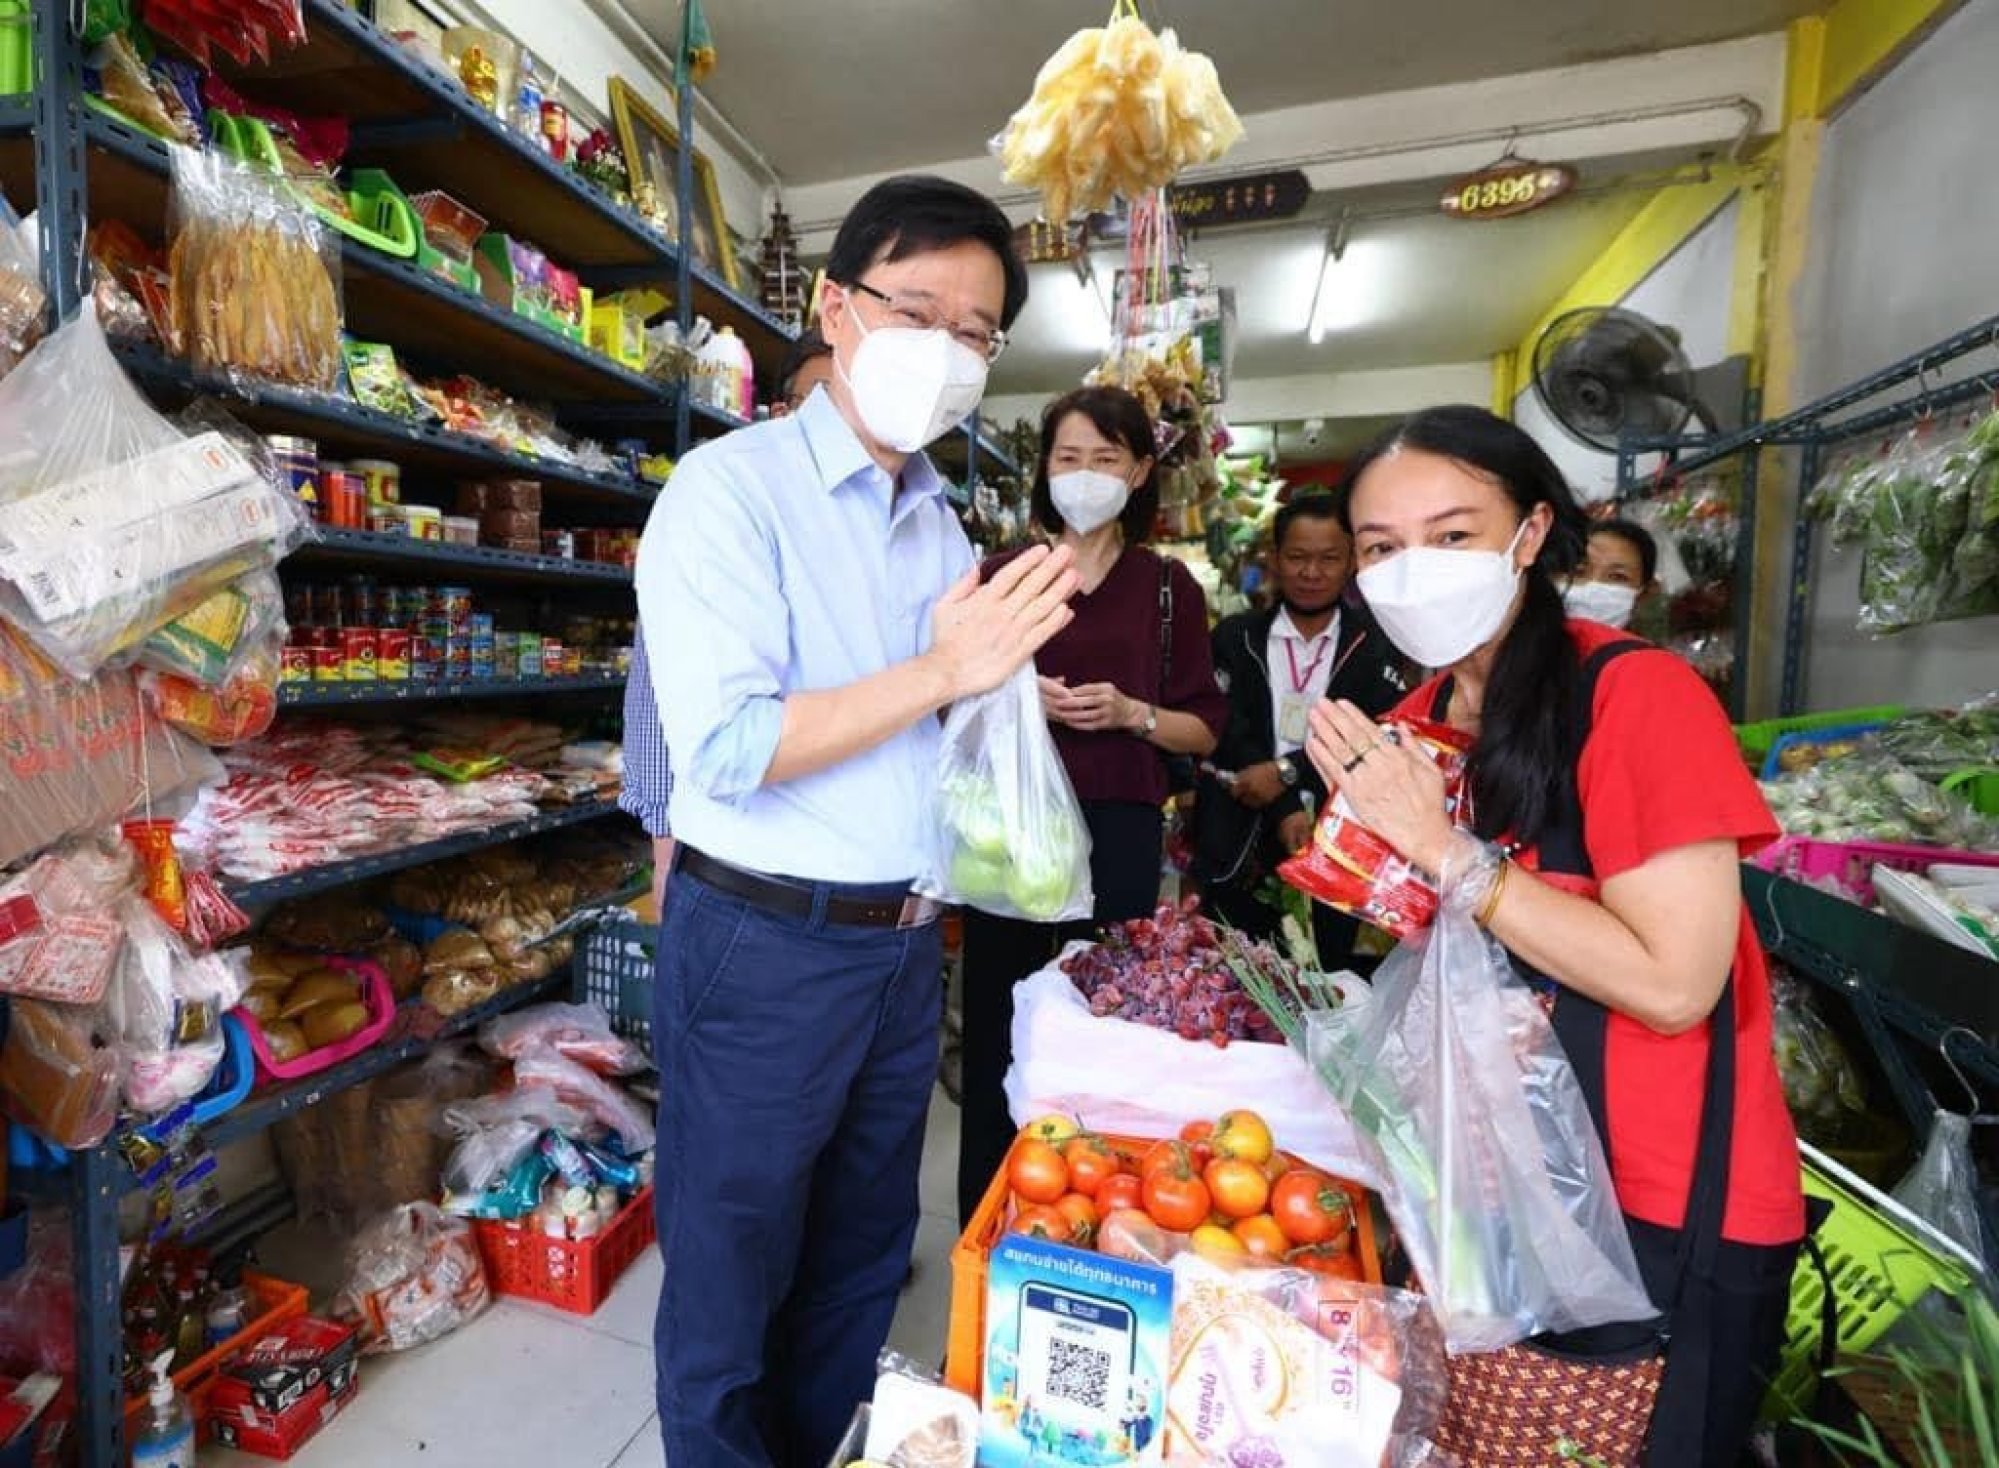 John Lee visits a grocery store in Thailand during his trip. Photo: Handout